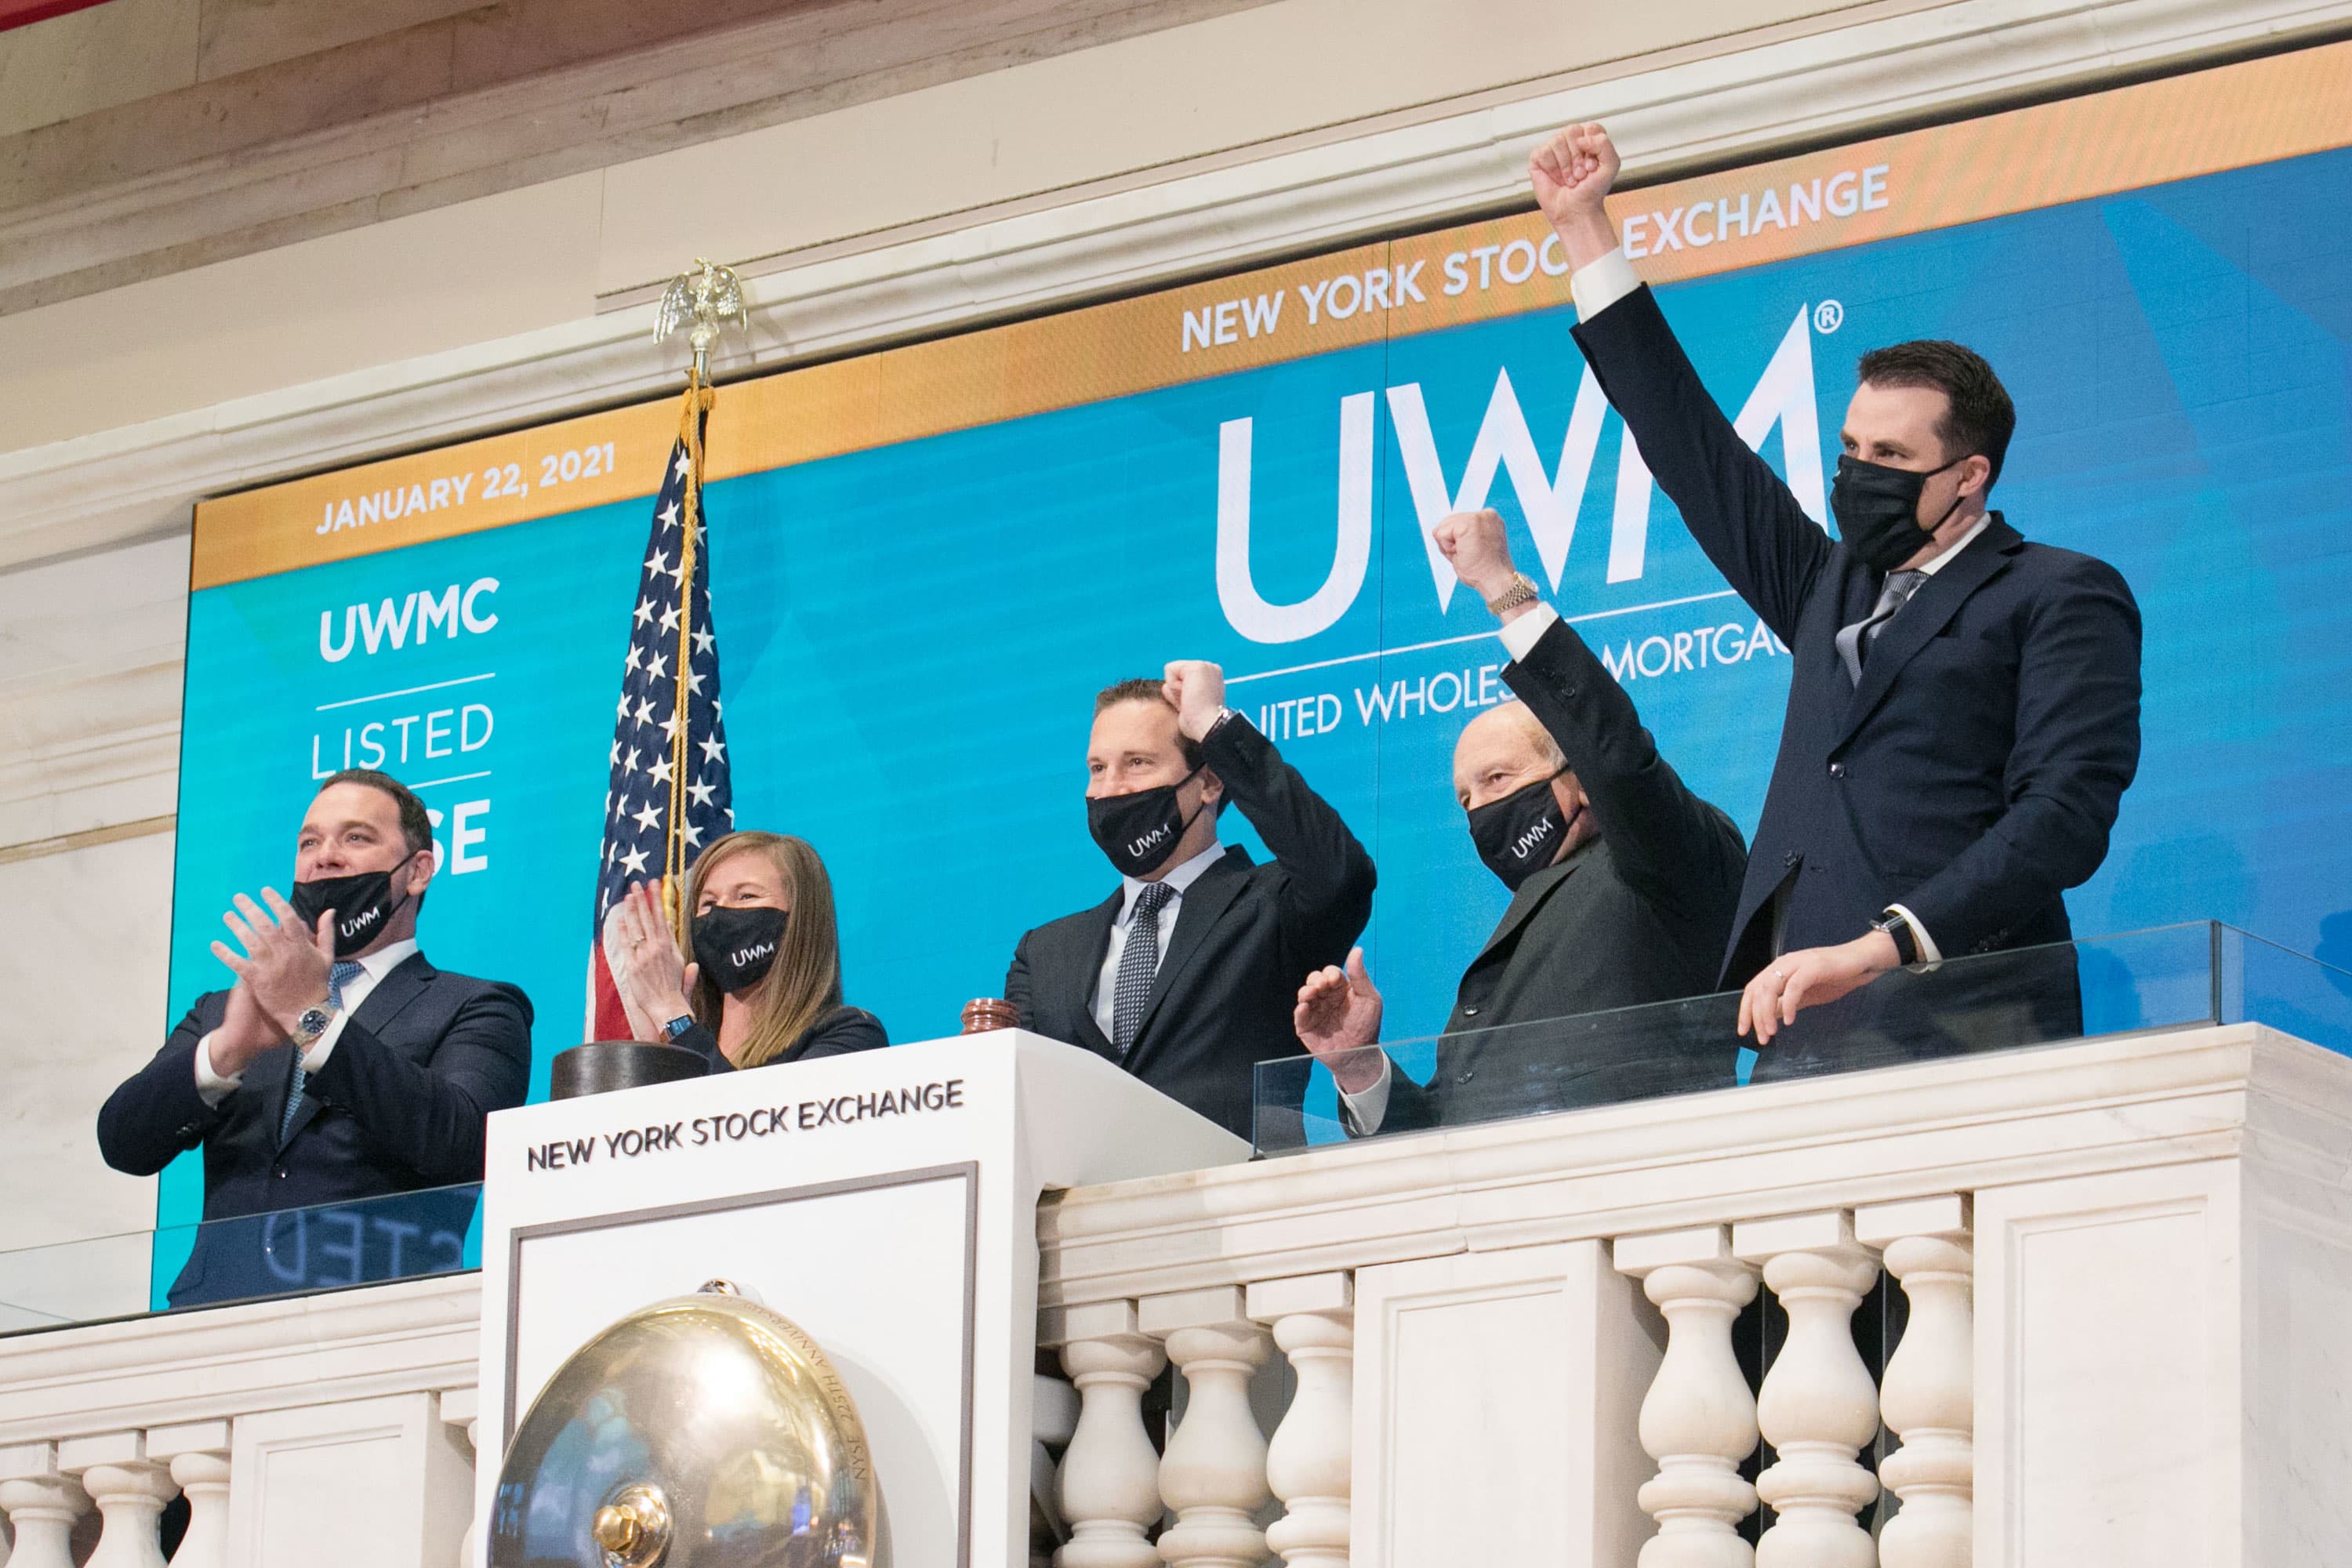 UWM CEO says Quicken Loans fight is paying off